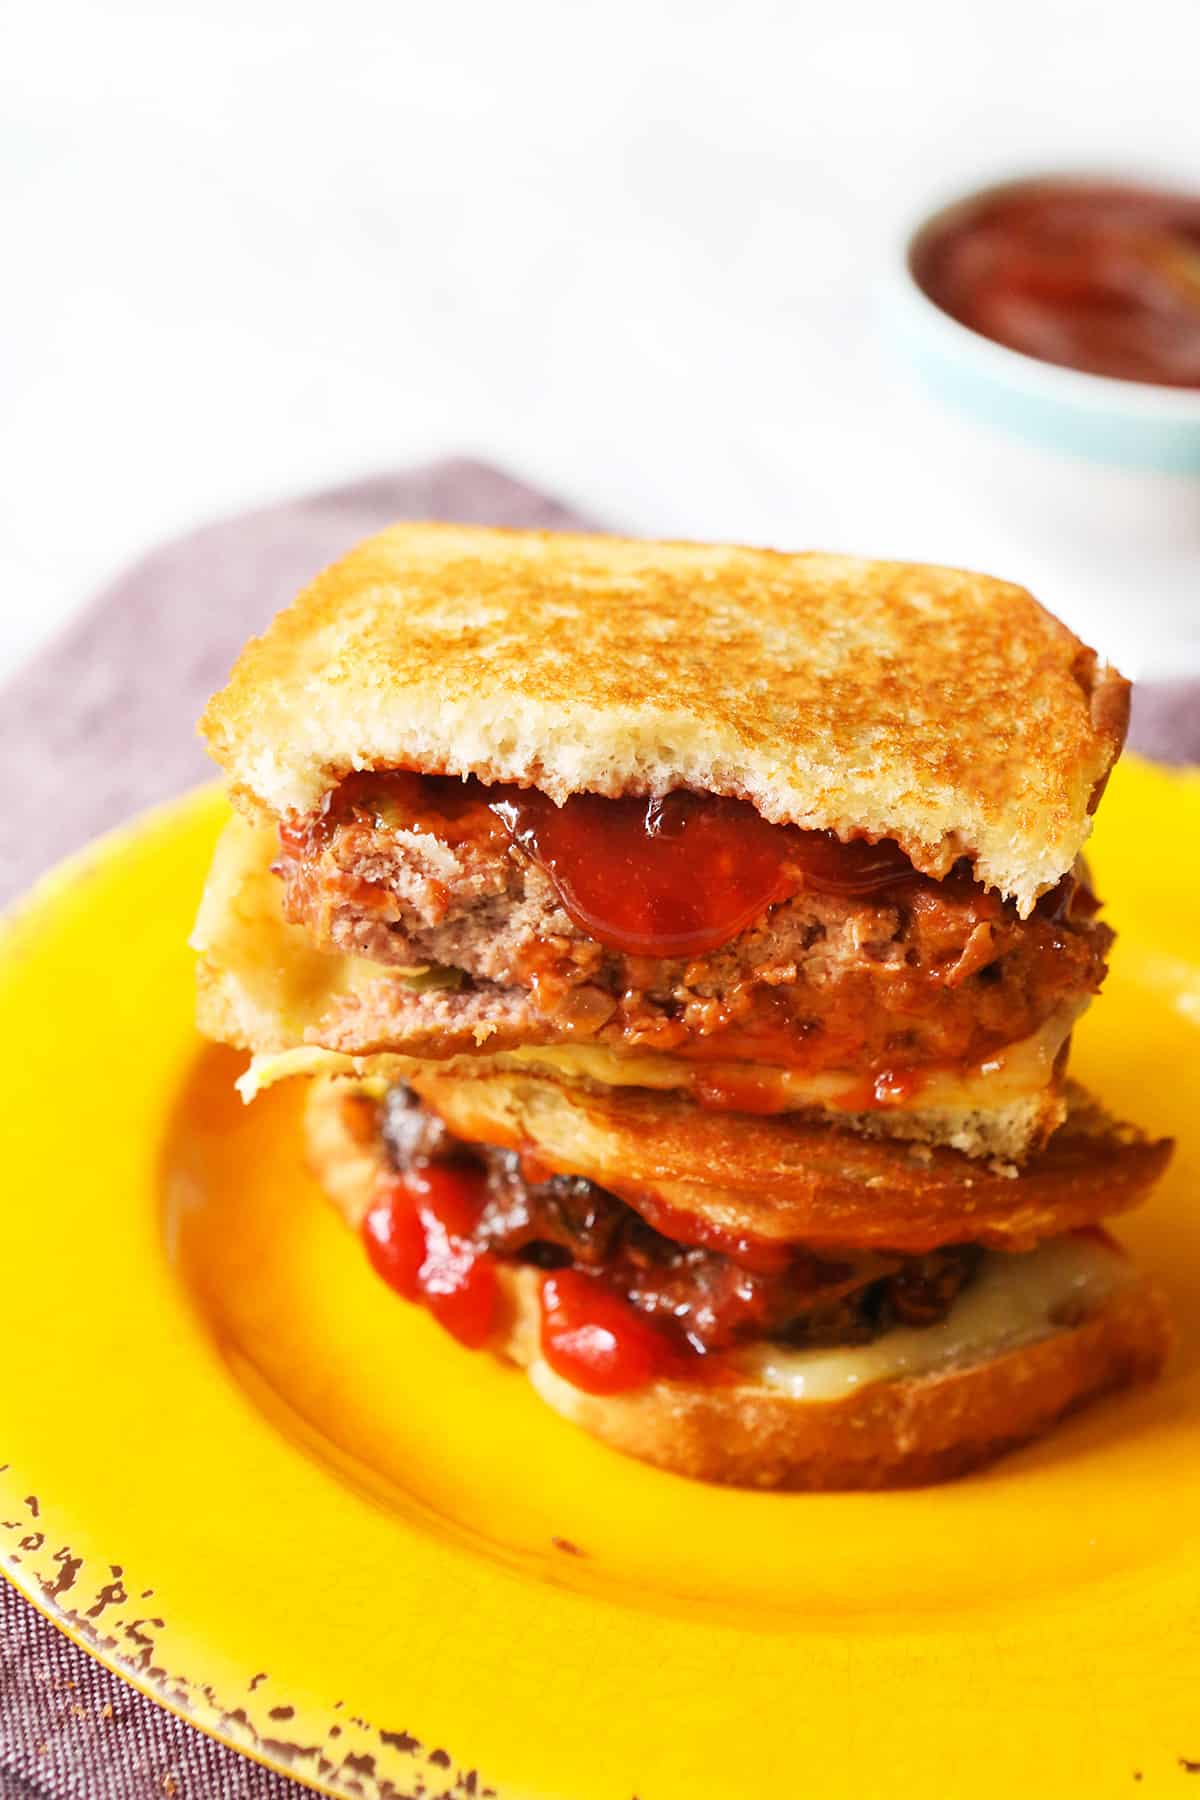 Leftover meatloaf sandwich cut in half and stacked on a yellow plate.